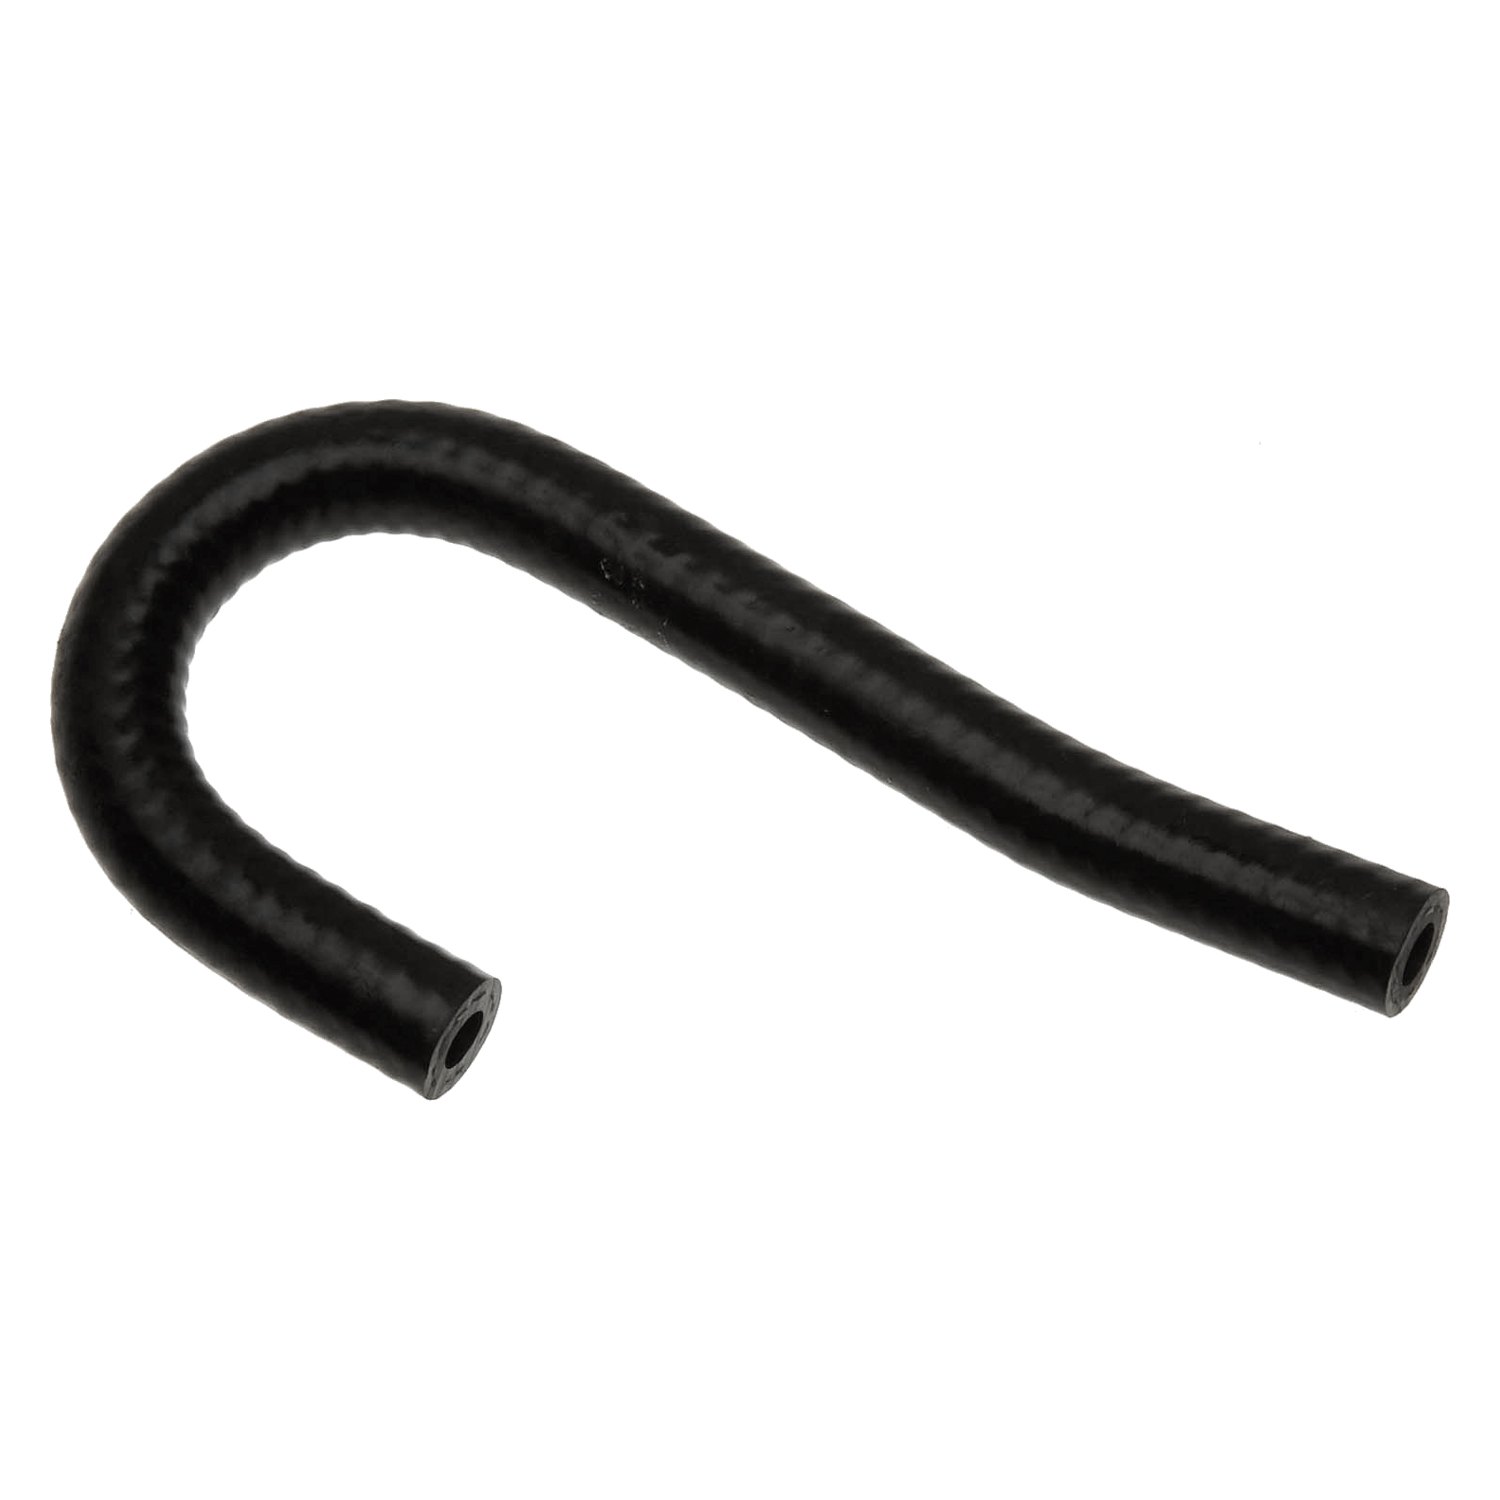 ACDelco 14412S Professional Molded Heater Hose